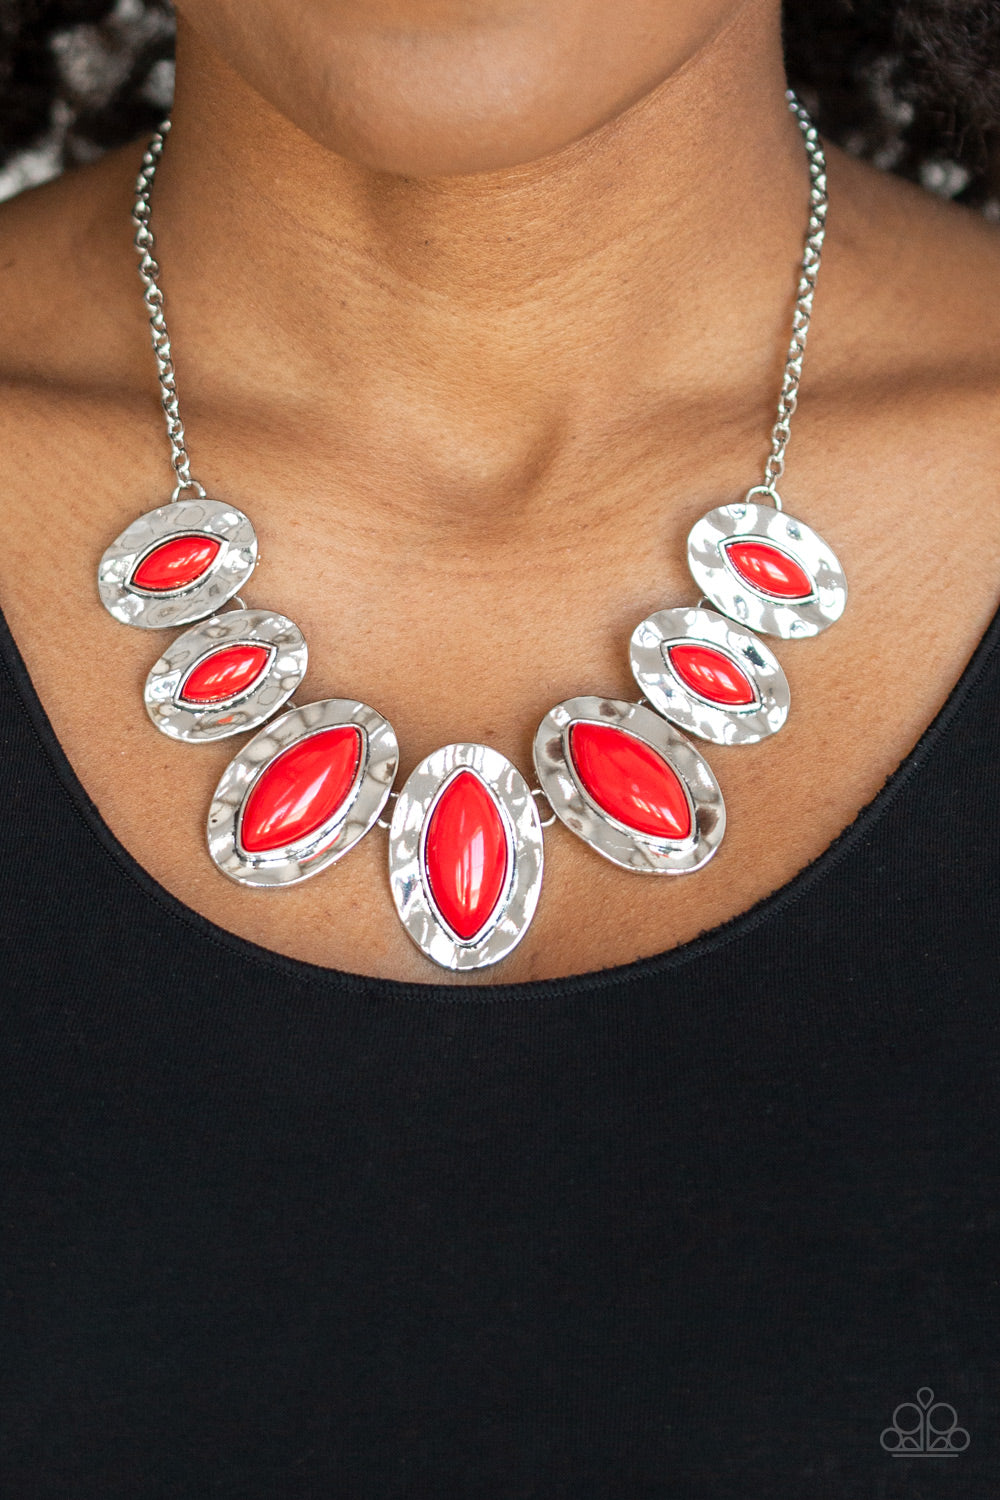 Terra Color - red - Paparazzi necklace